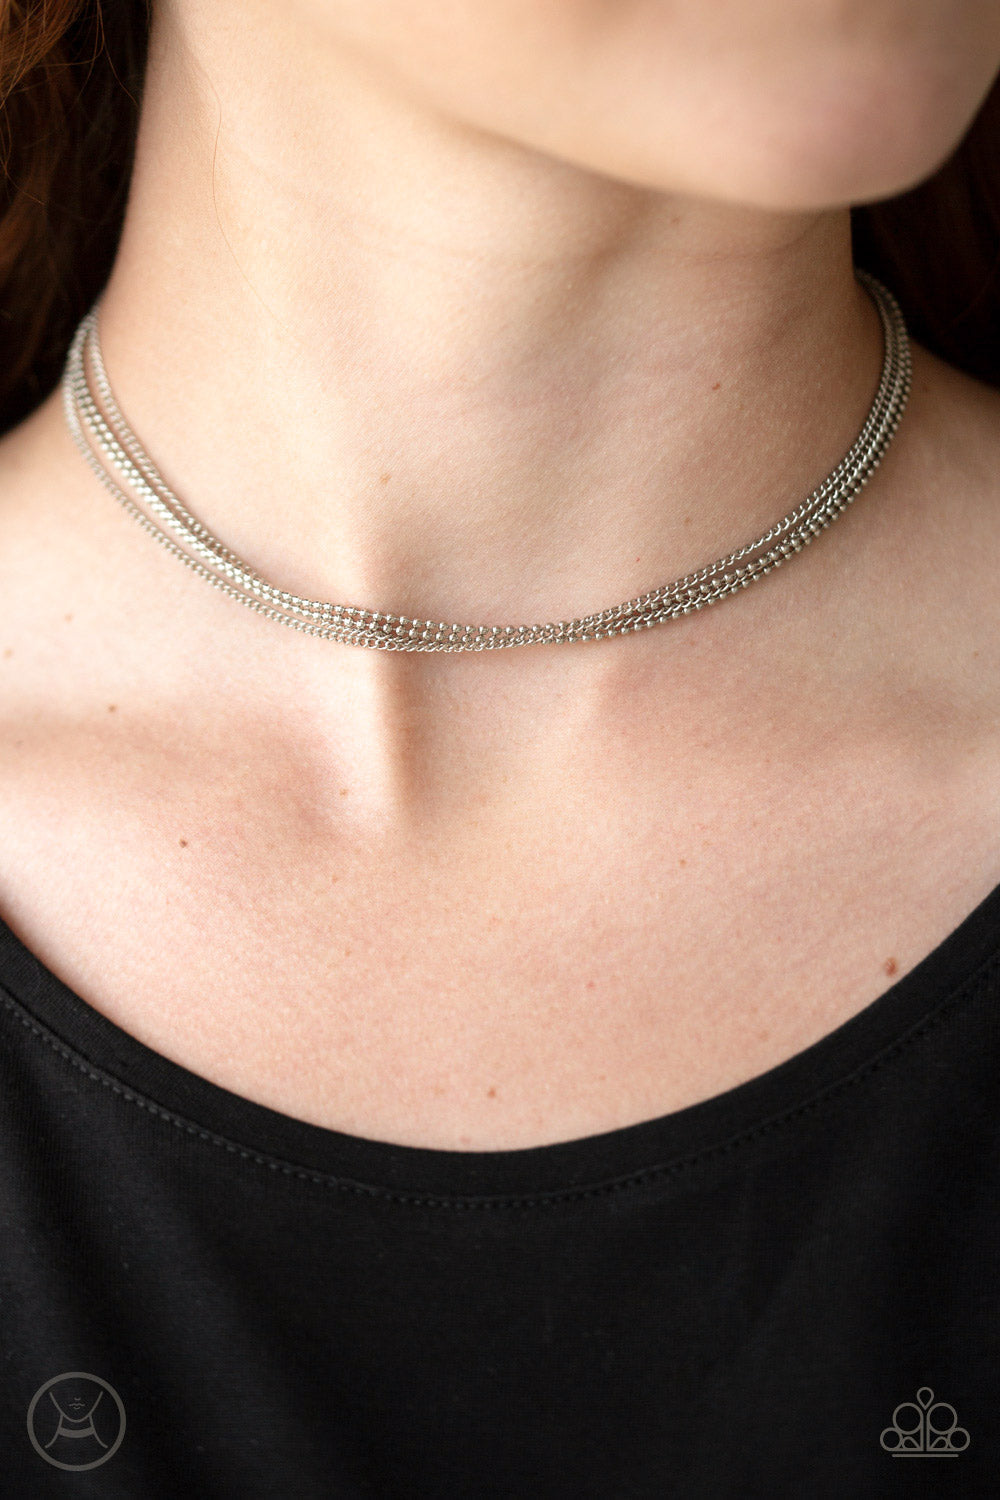 If You Dare - Silver Choker Necklace - Paparazzi Accessories - Mismatched silver chains layer around the neck in a daring fashion. Features an adjustable clasp closure. Sold as one individual choker necklace.